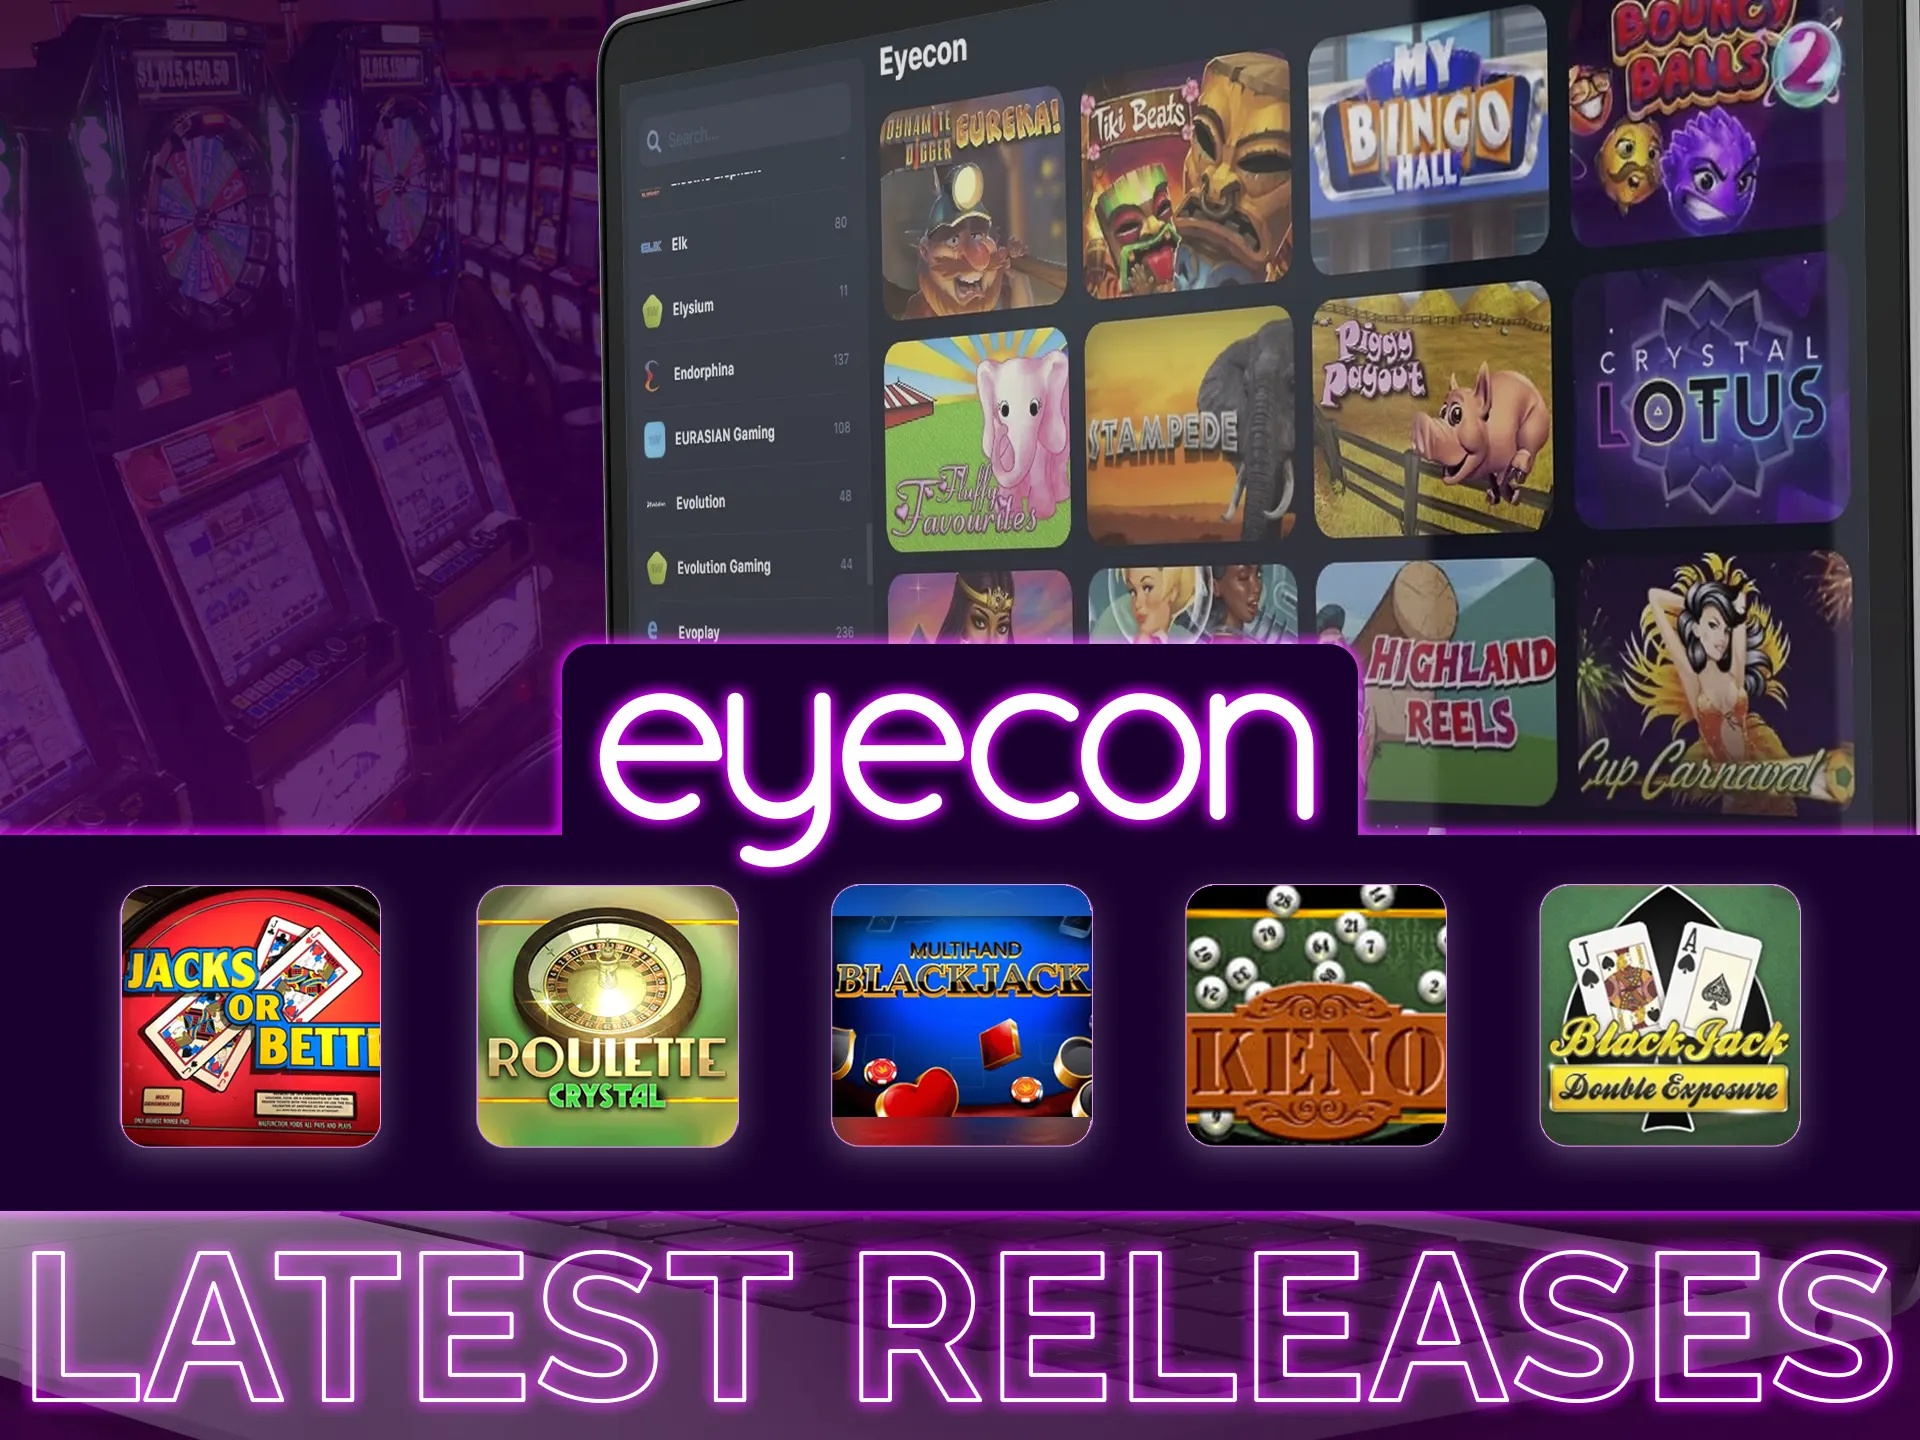 Check out latest releases of the Eyecon Software provider!